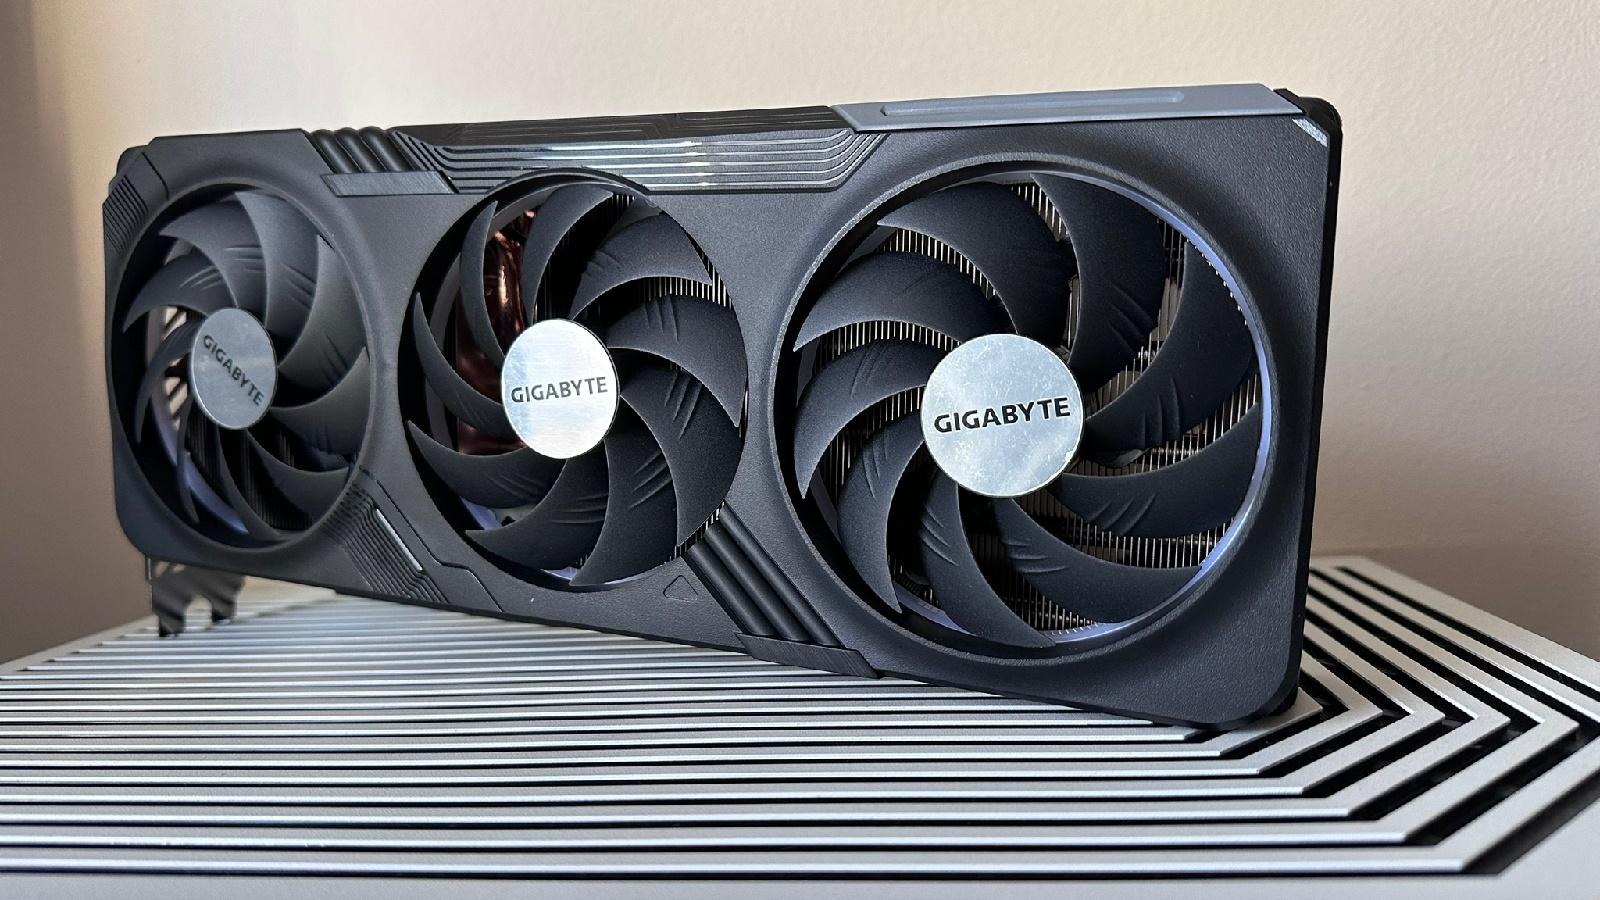 You'll be waiting a while for RTX 4070 and RTX 4060 Ti if these